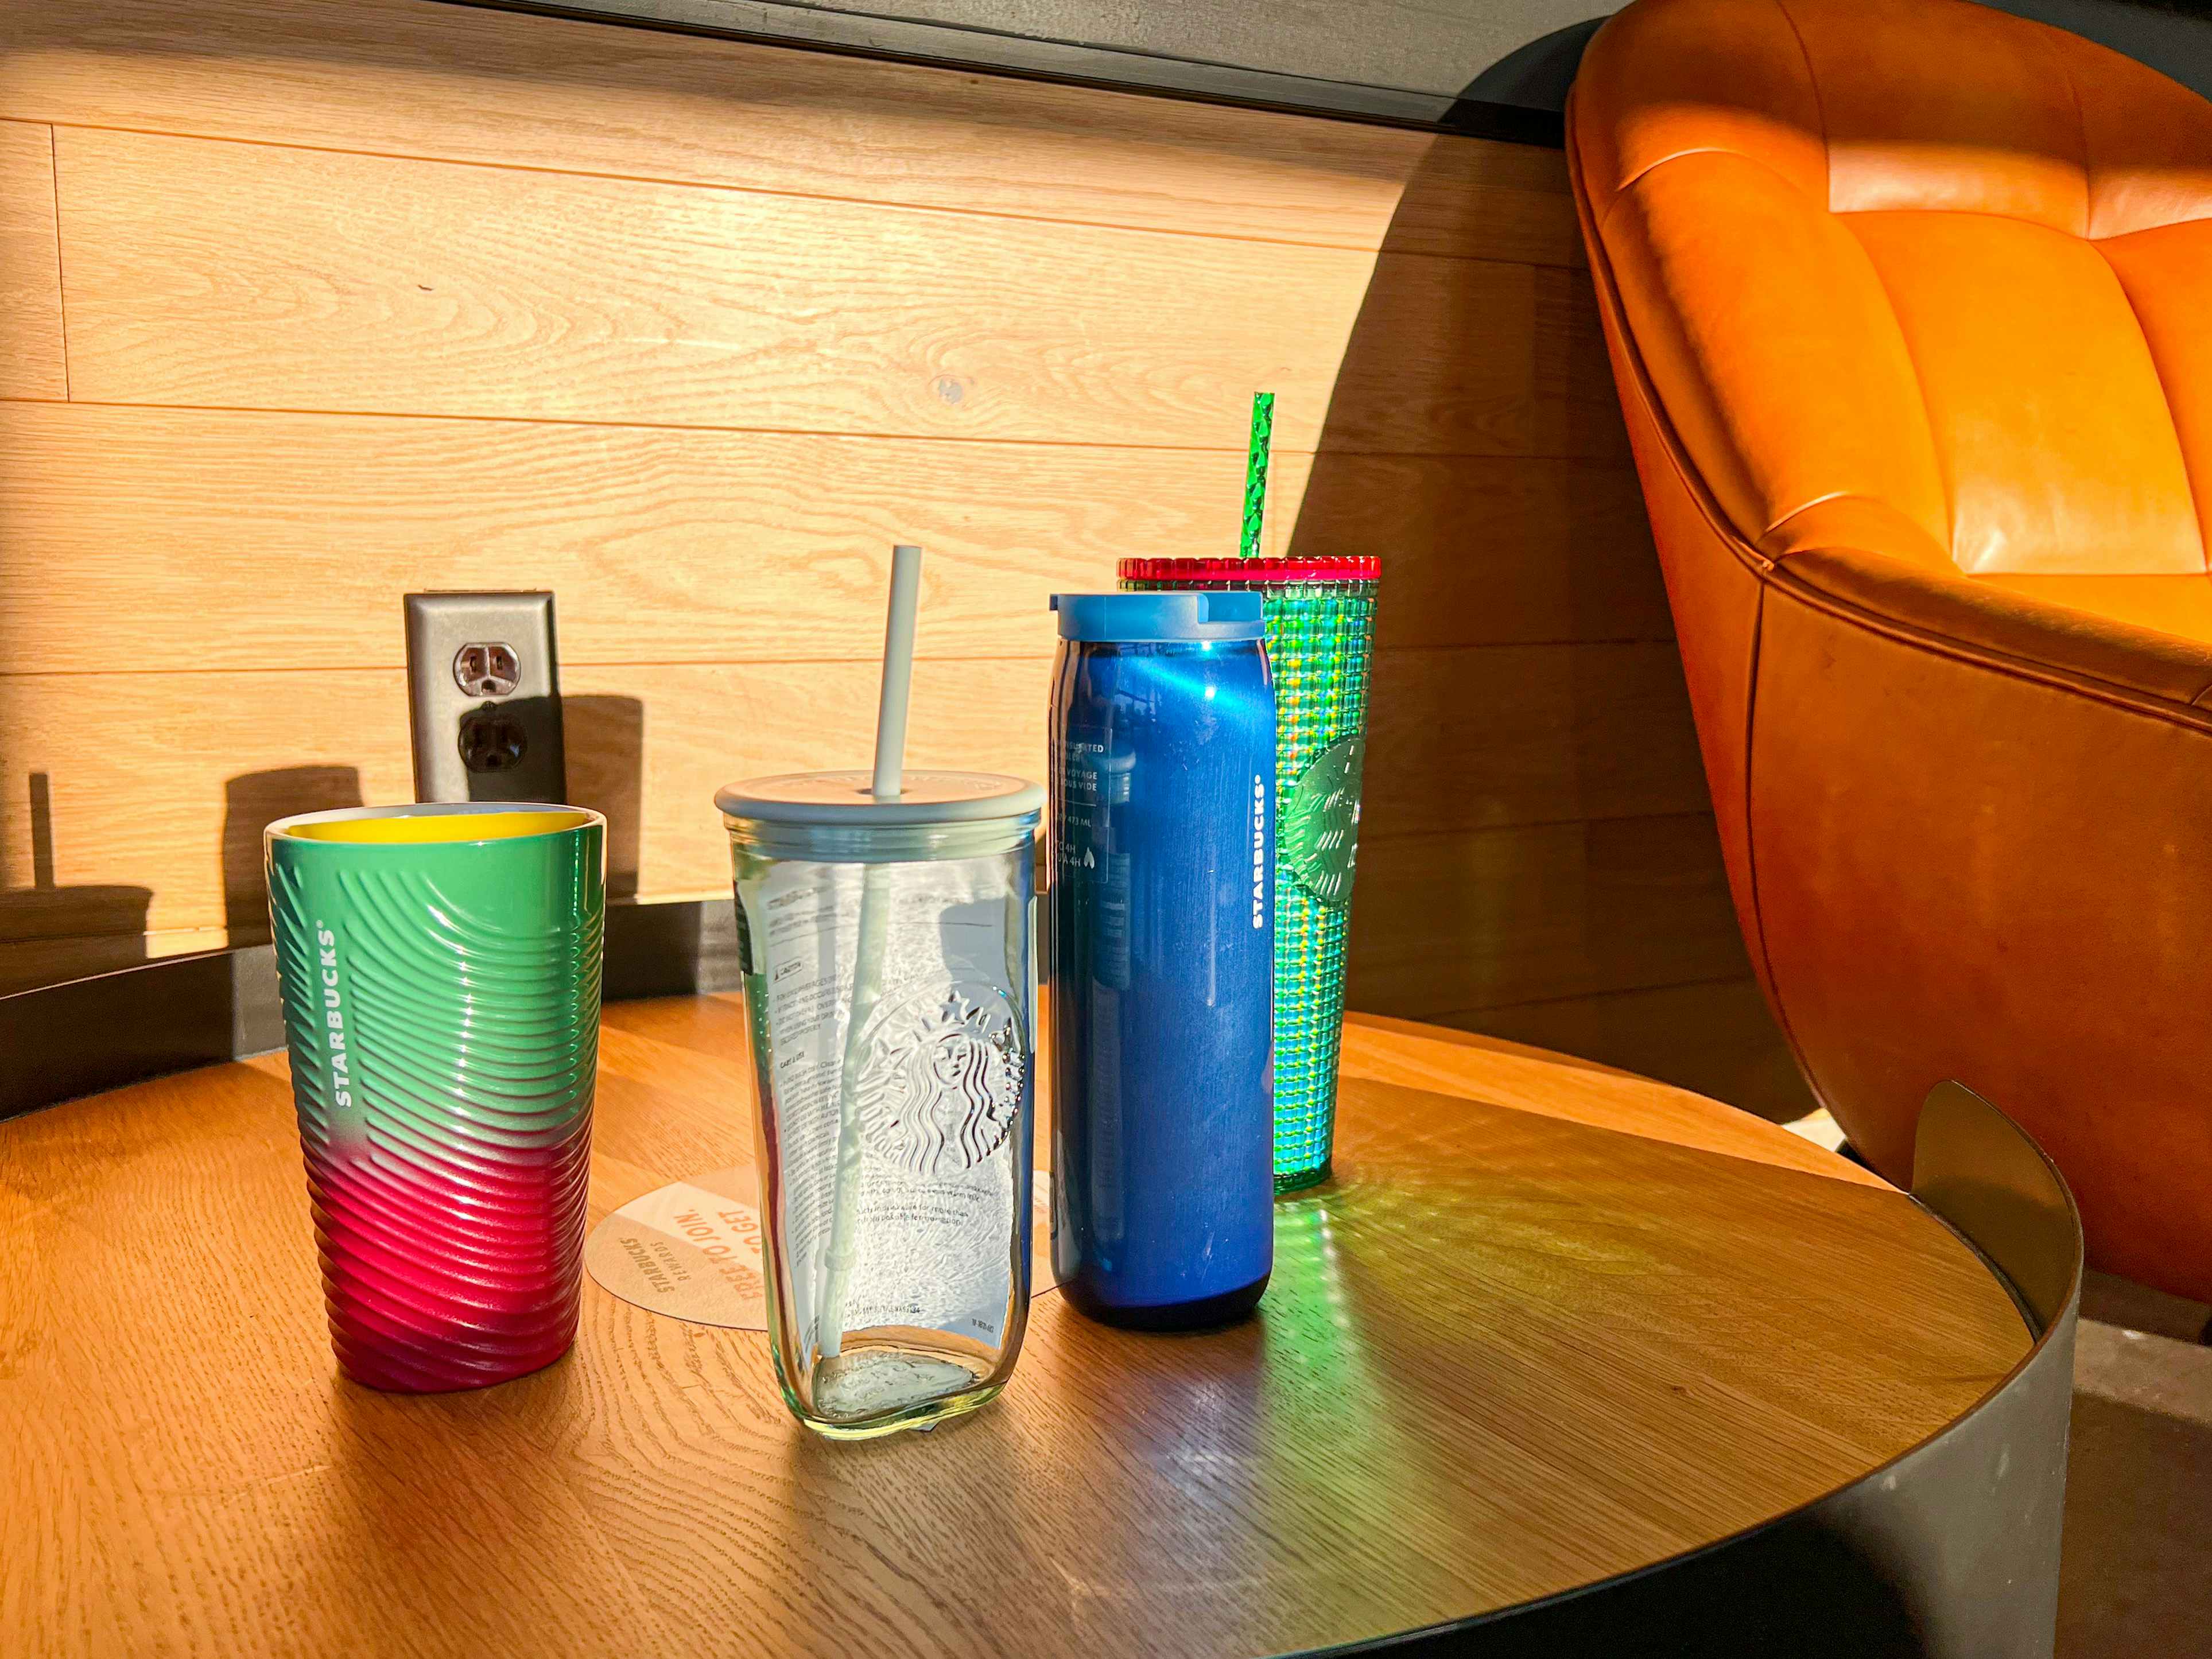 Four stabucks cups on a counter inside cafe